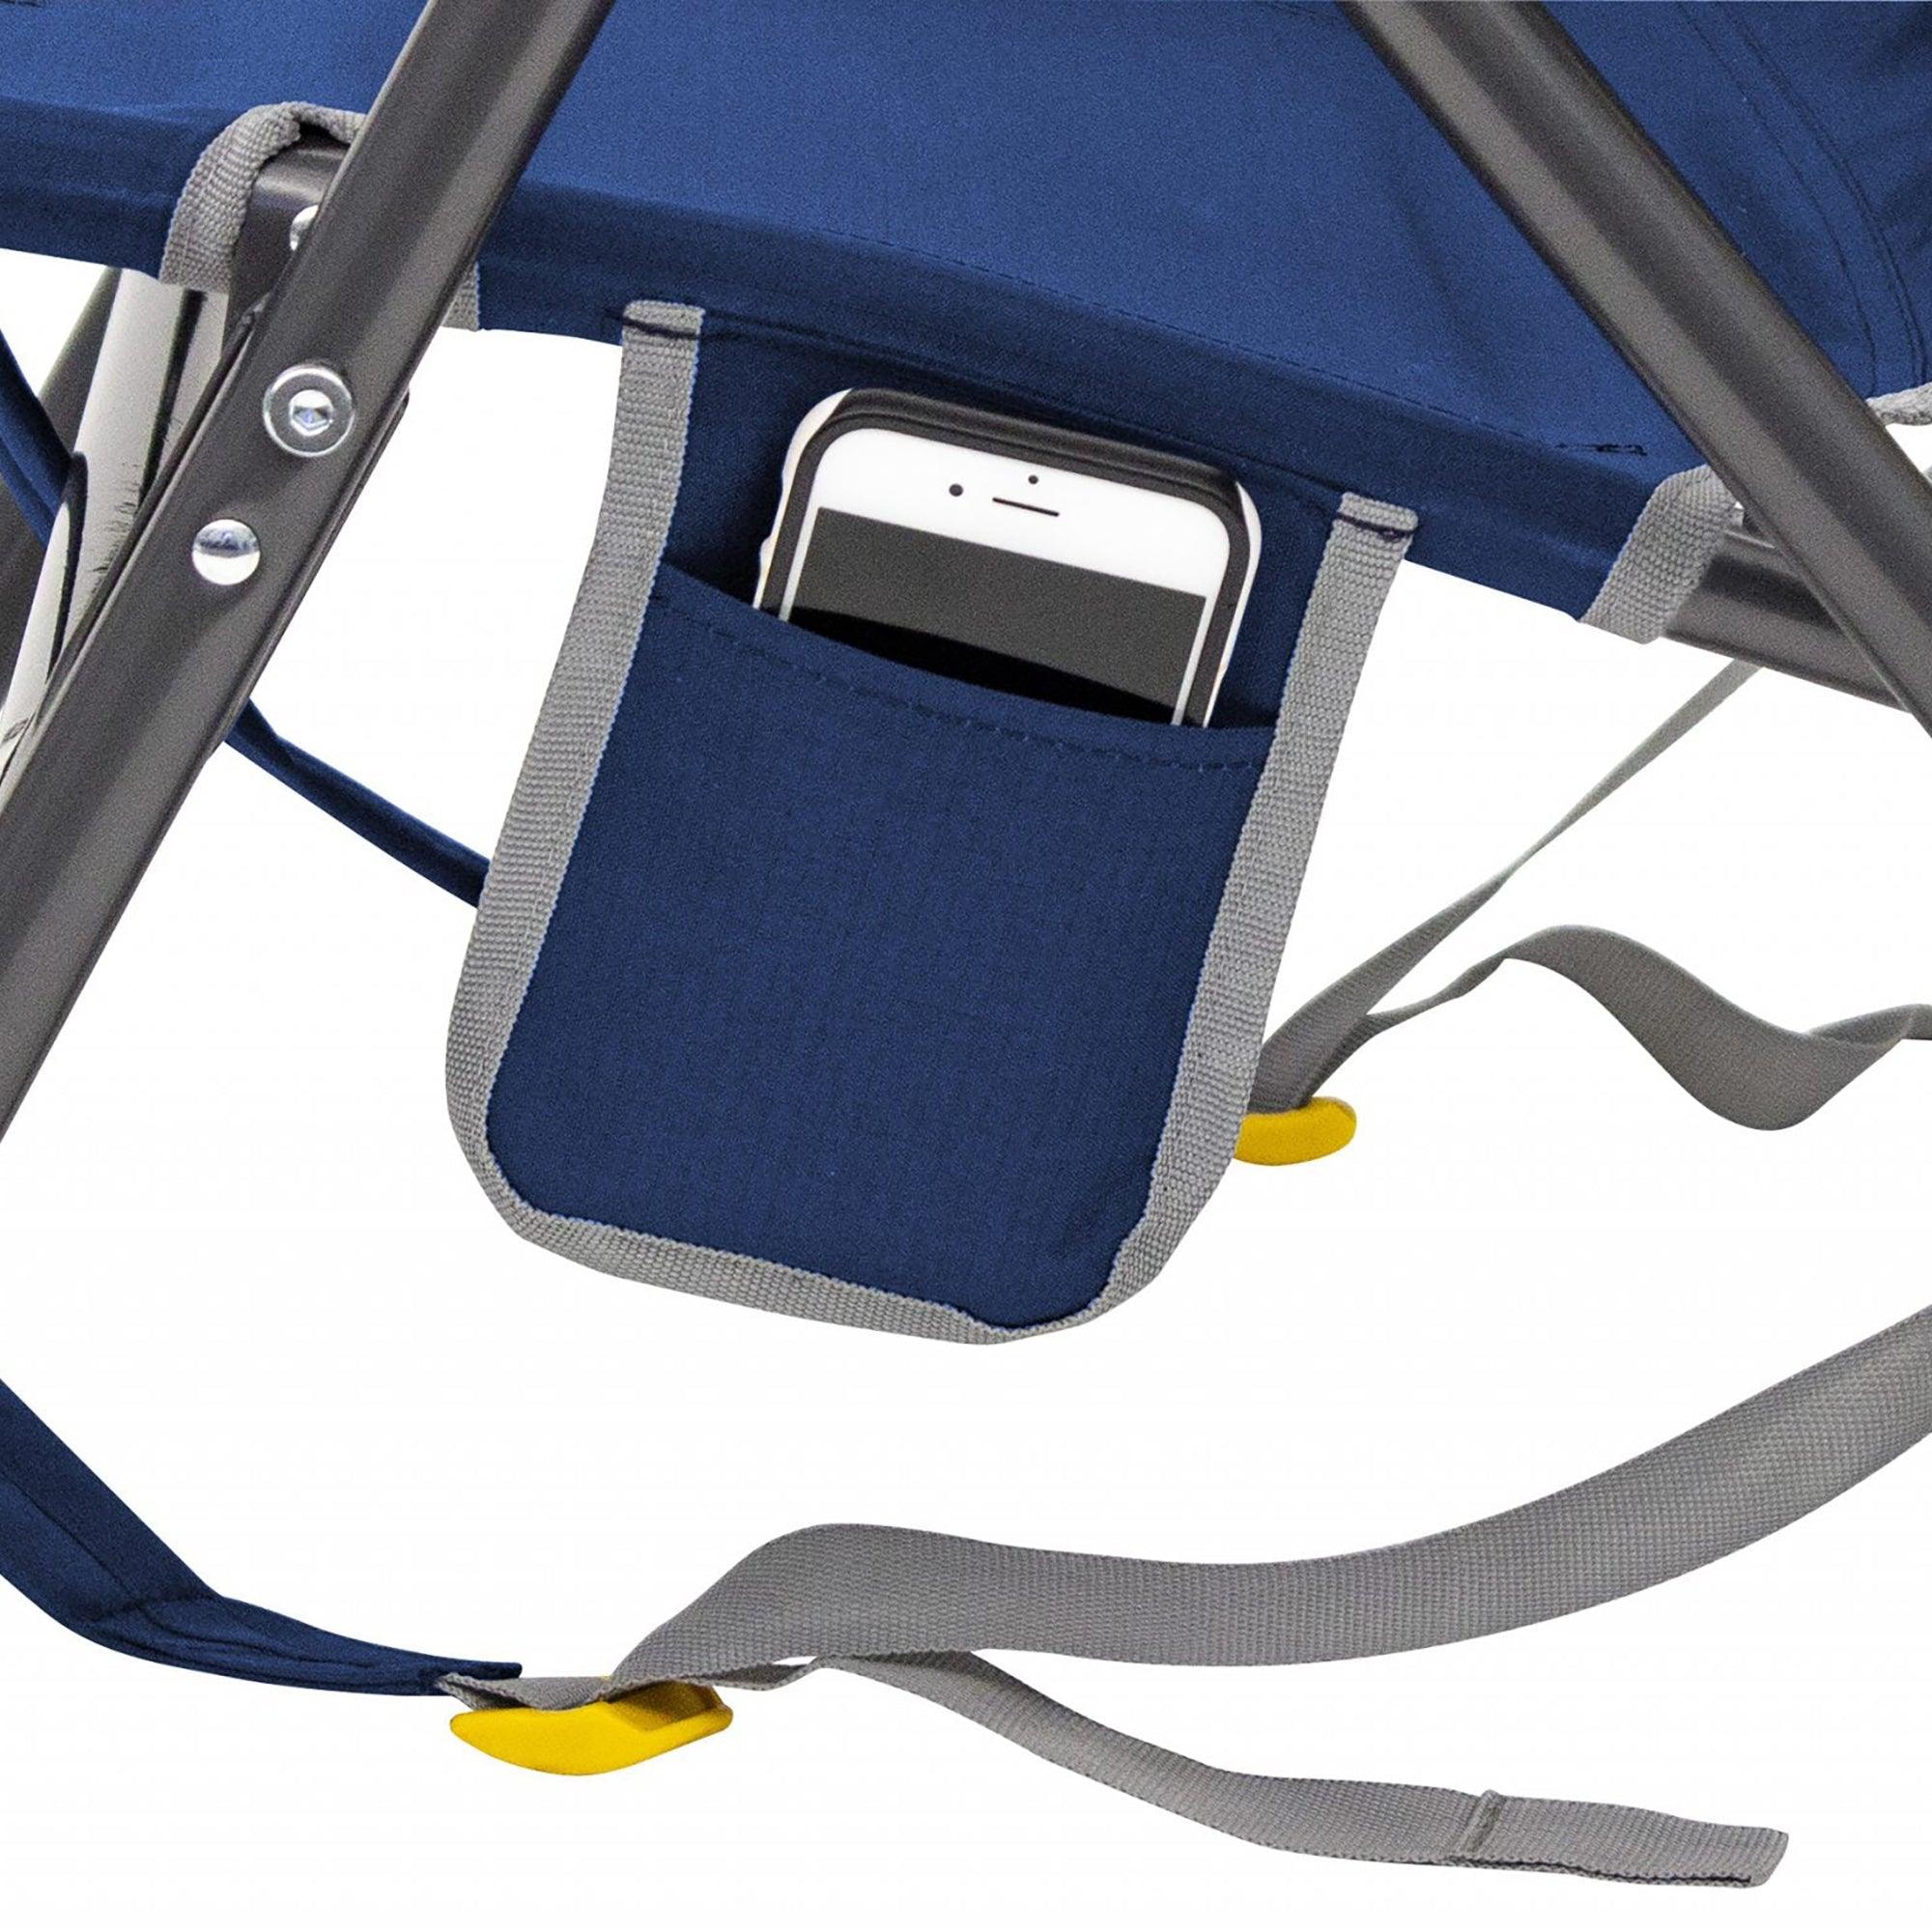 SunShade Backpack Event Chair, Royal Blue, Phone Holder